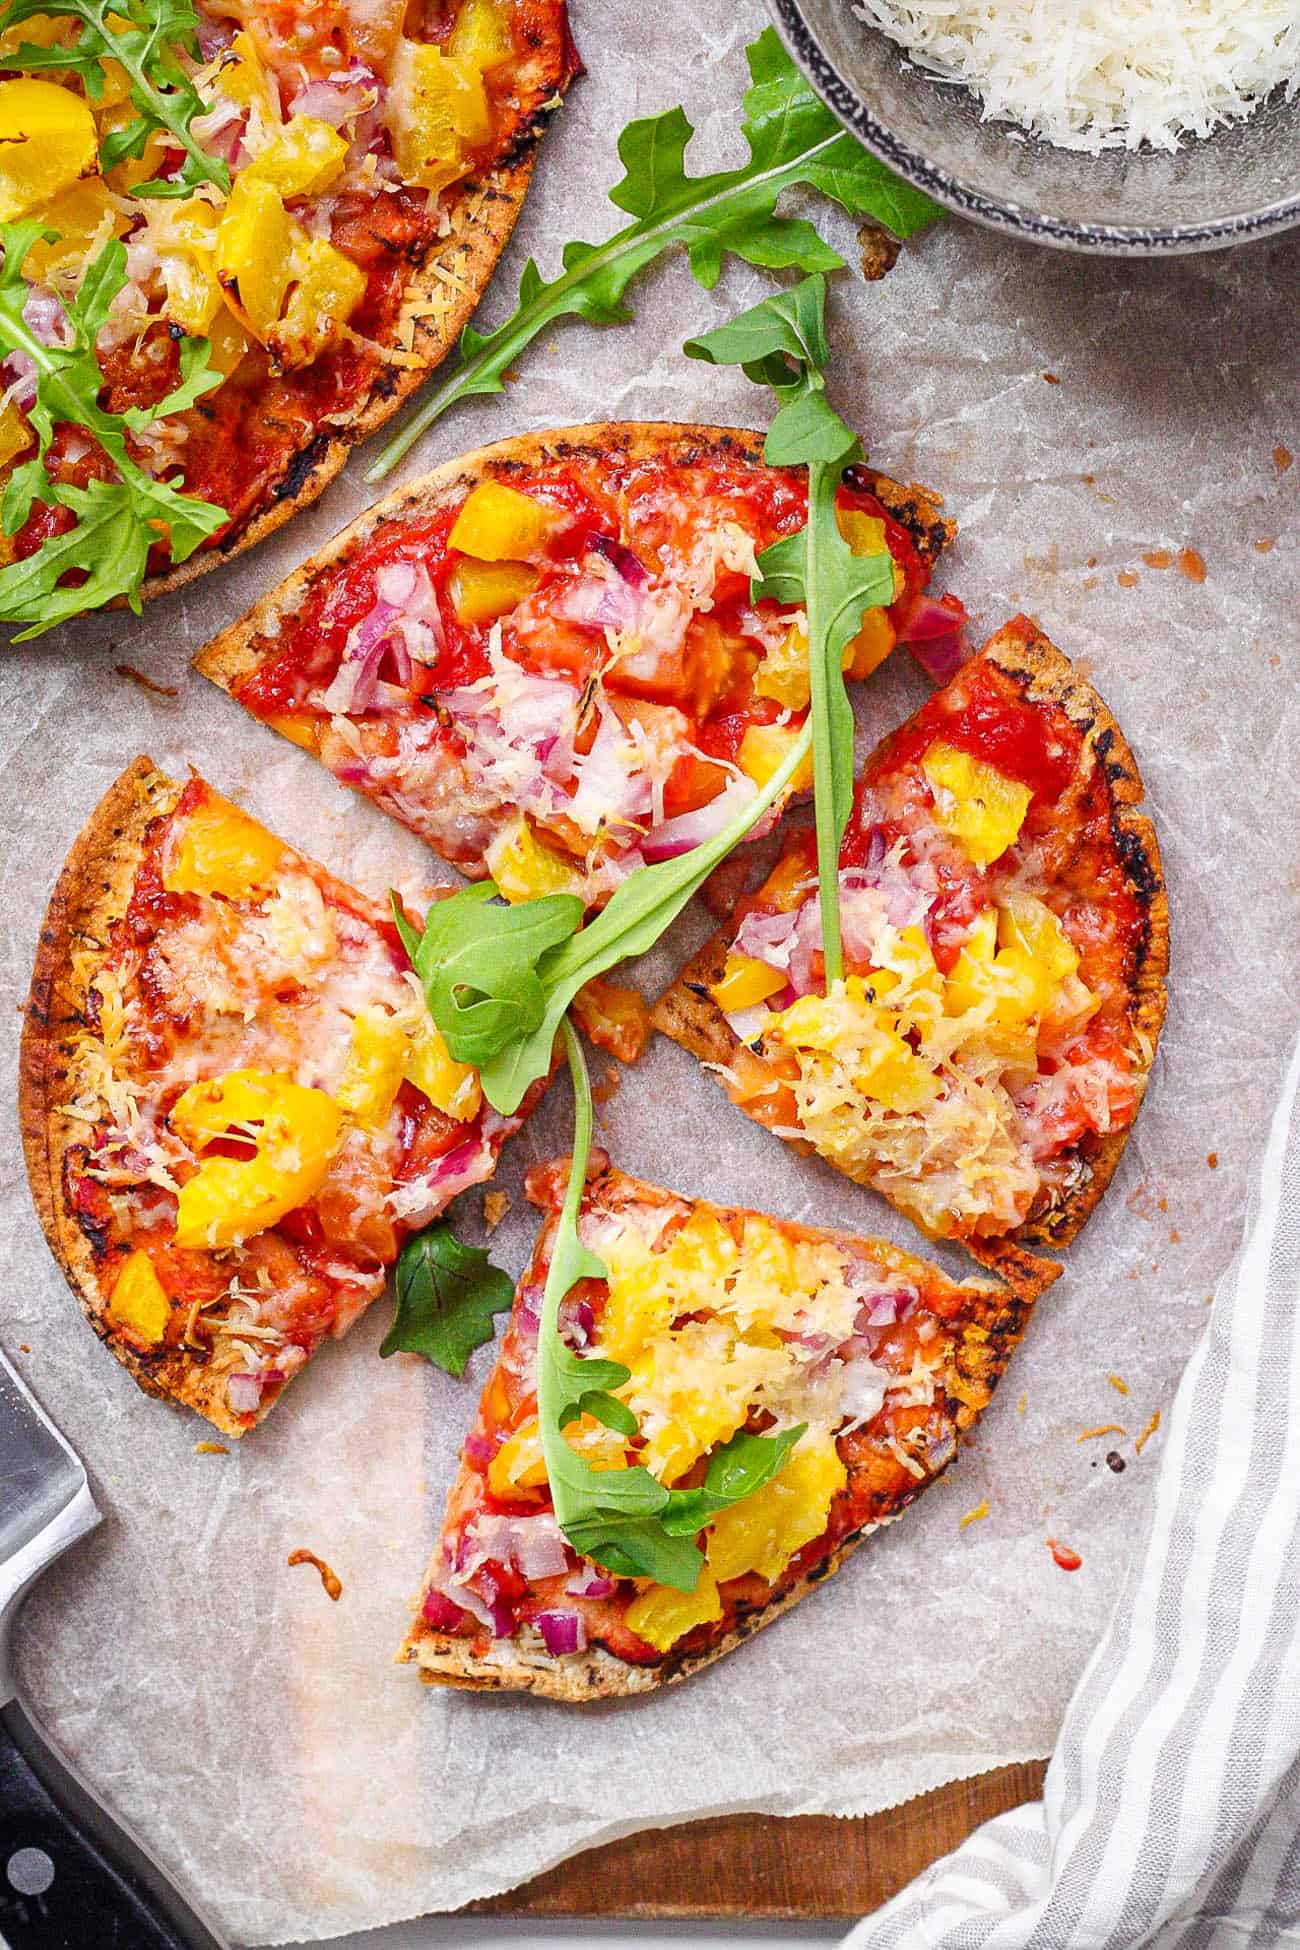 healthy ،memade pita pizza / pita bread pizza with veggies as toppings on a cutting board